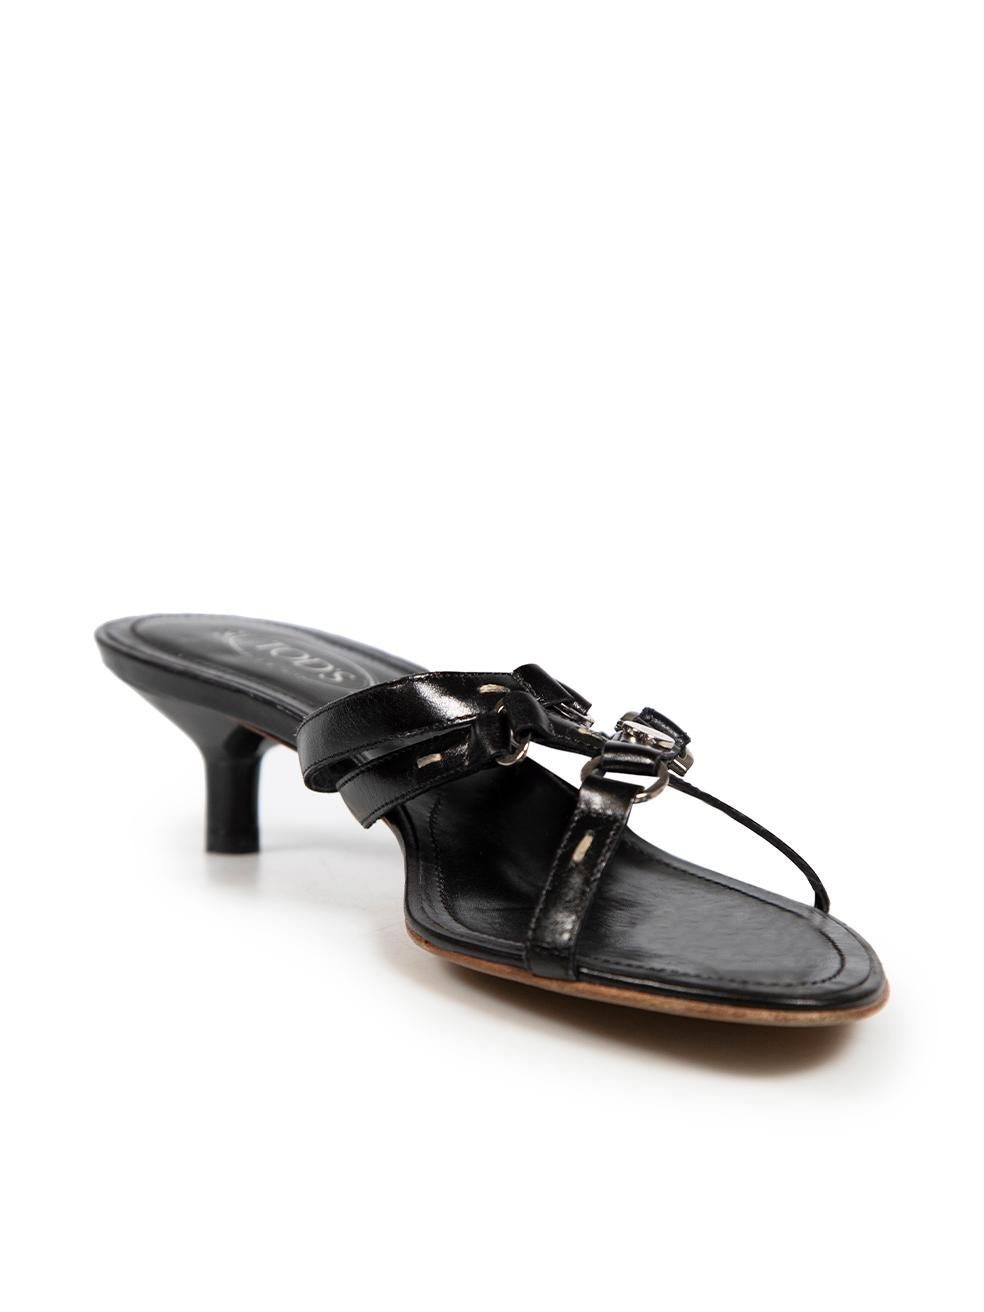 CONDITION is Good. Minor wear to sandals is evident. Light wear to the straps with discolouration of the stitch detailing as well as some tarnishing of the hardware accents. Some scratches are found through the insoles and mild abrasion is seen on